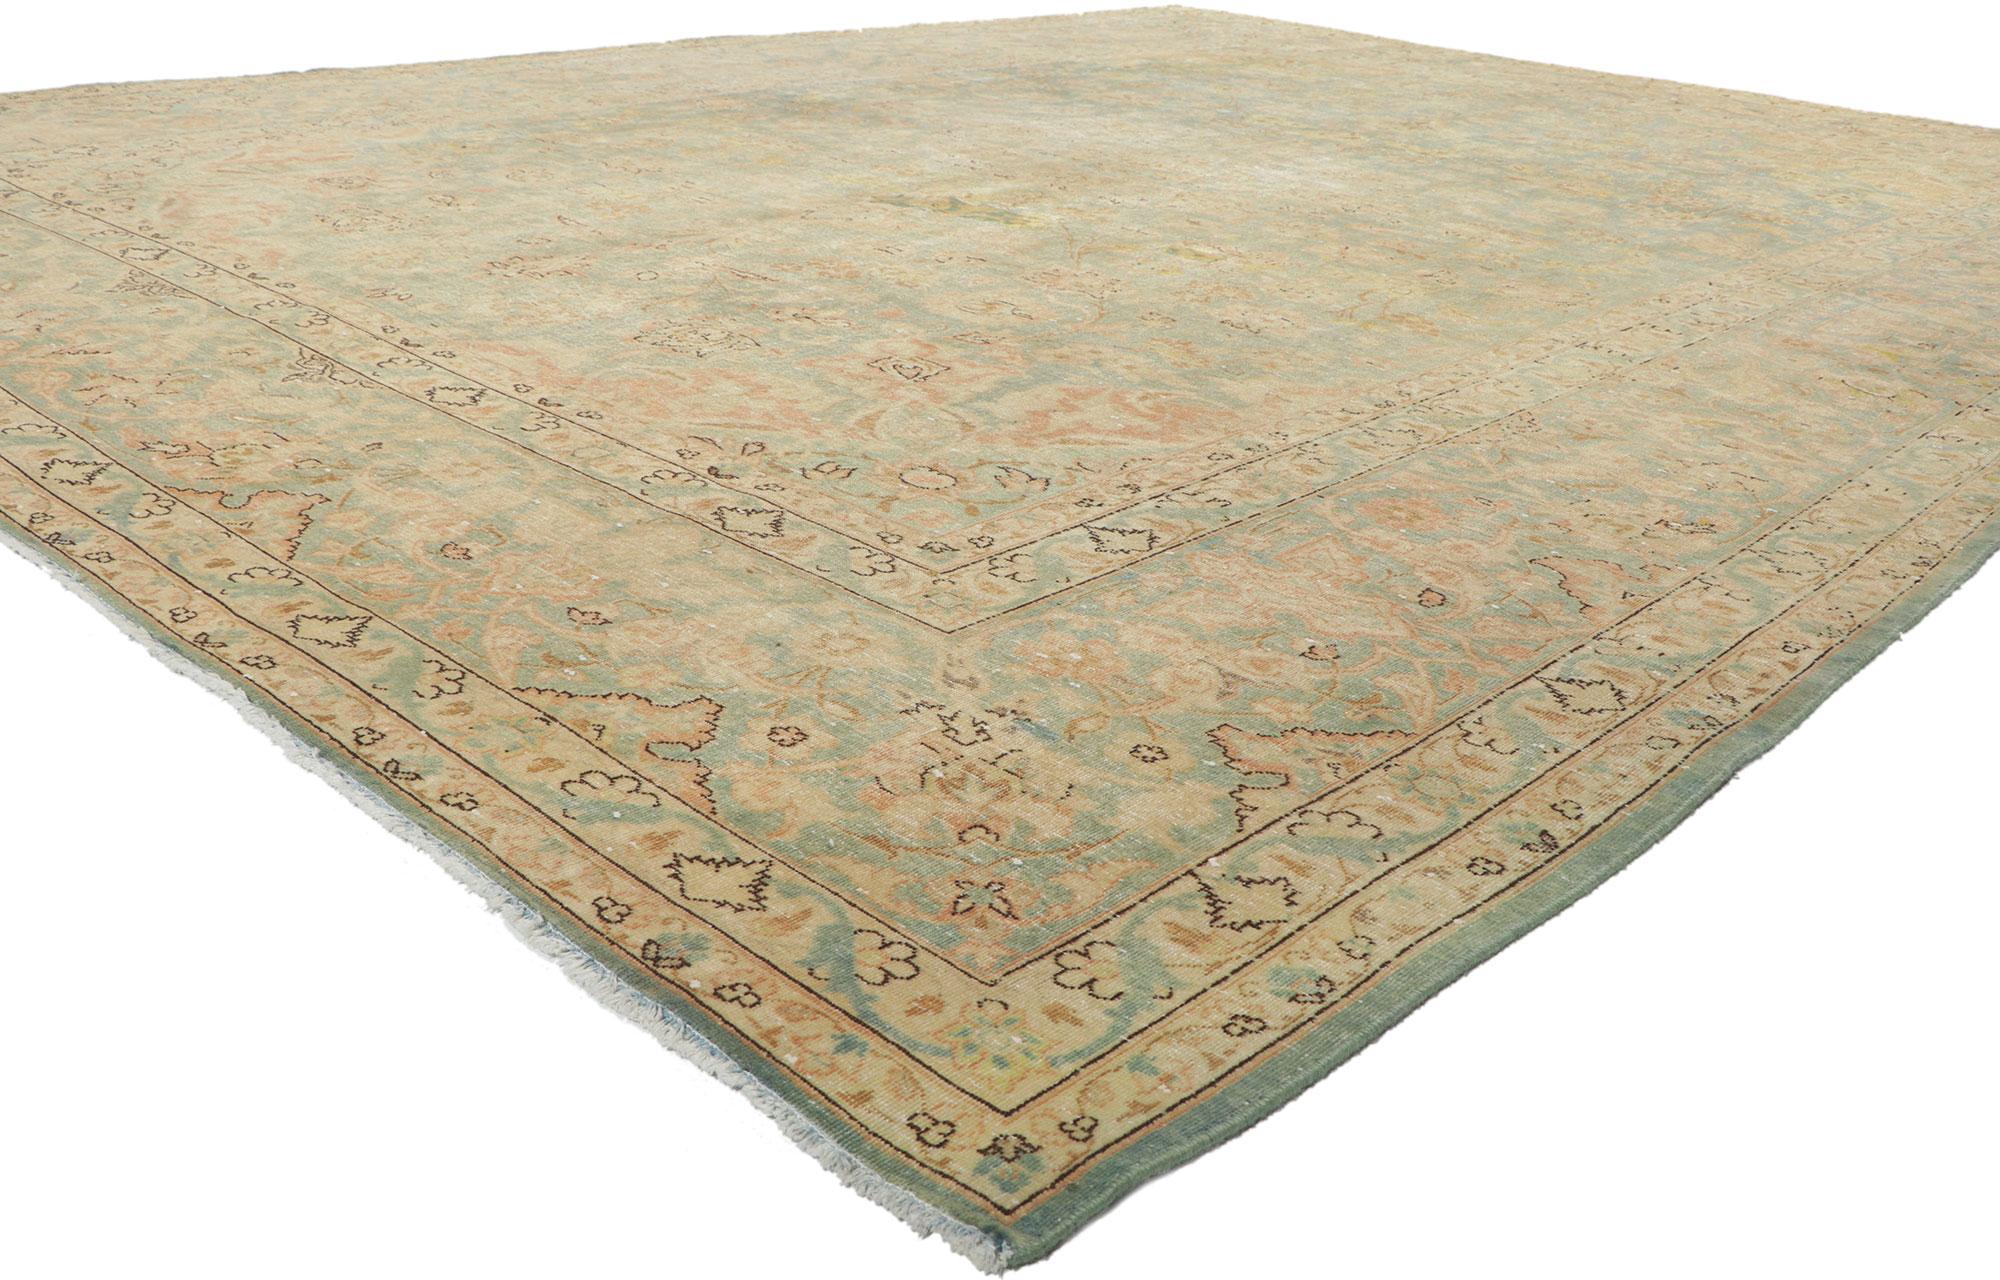 61006 Vintage Persian Kashan Rug, 10.05 x 13.08.
With its timeless style, incredible detail and texutre, this hand knotted wool vintage Persian Kashan rug is a captivating vision of woven beauty. The elaborate design and tranquil color palette